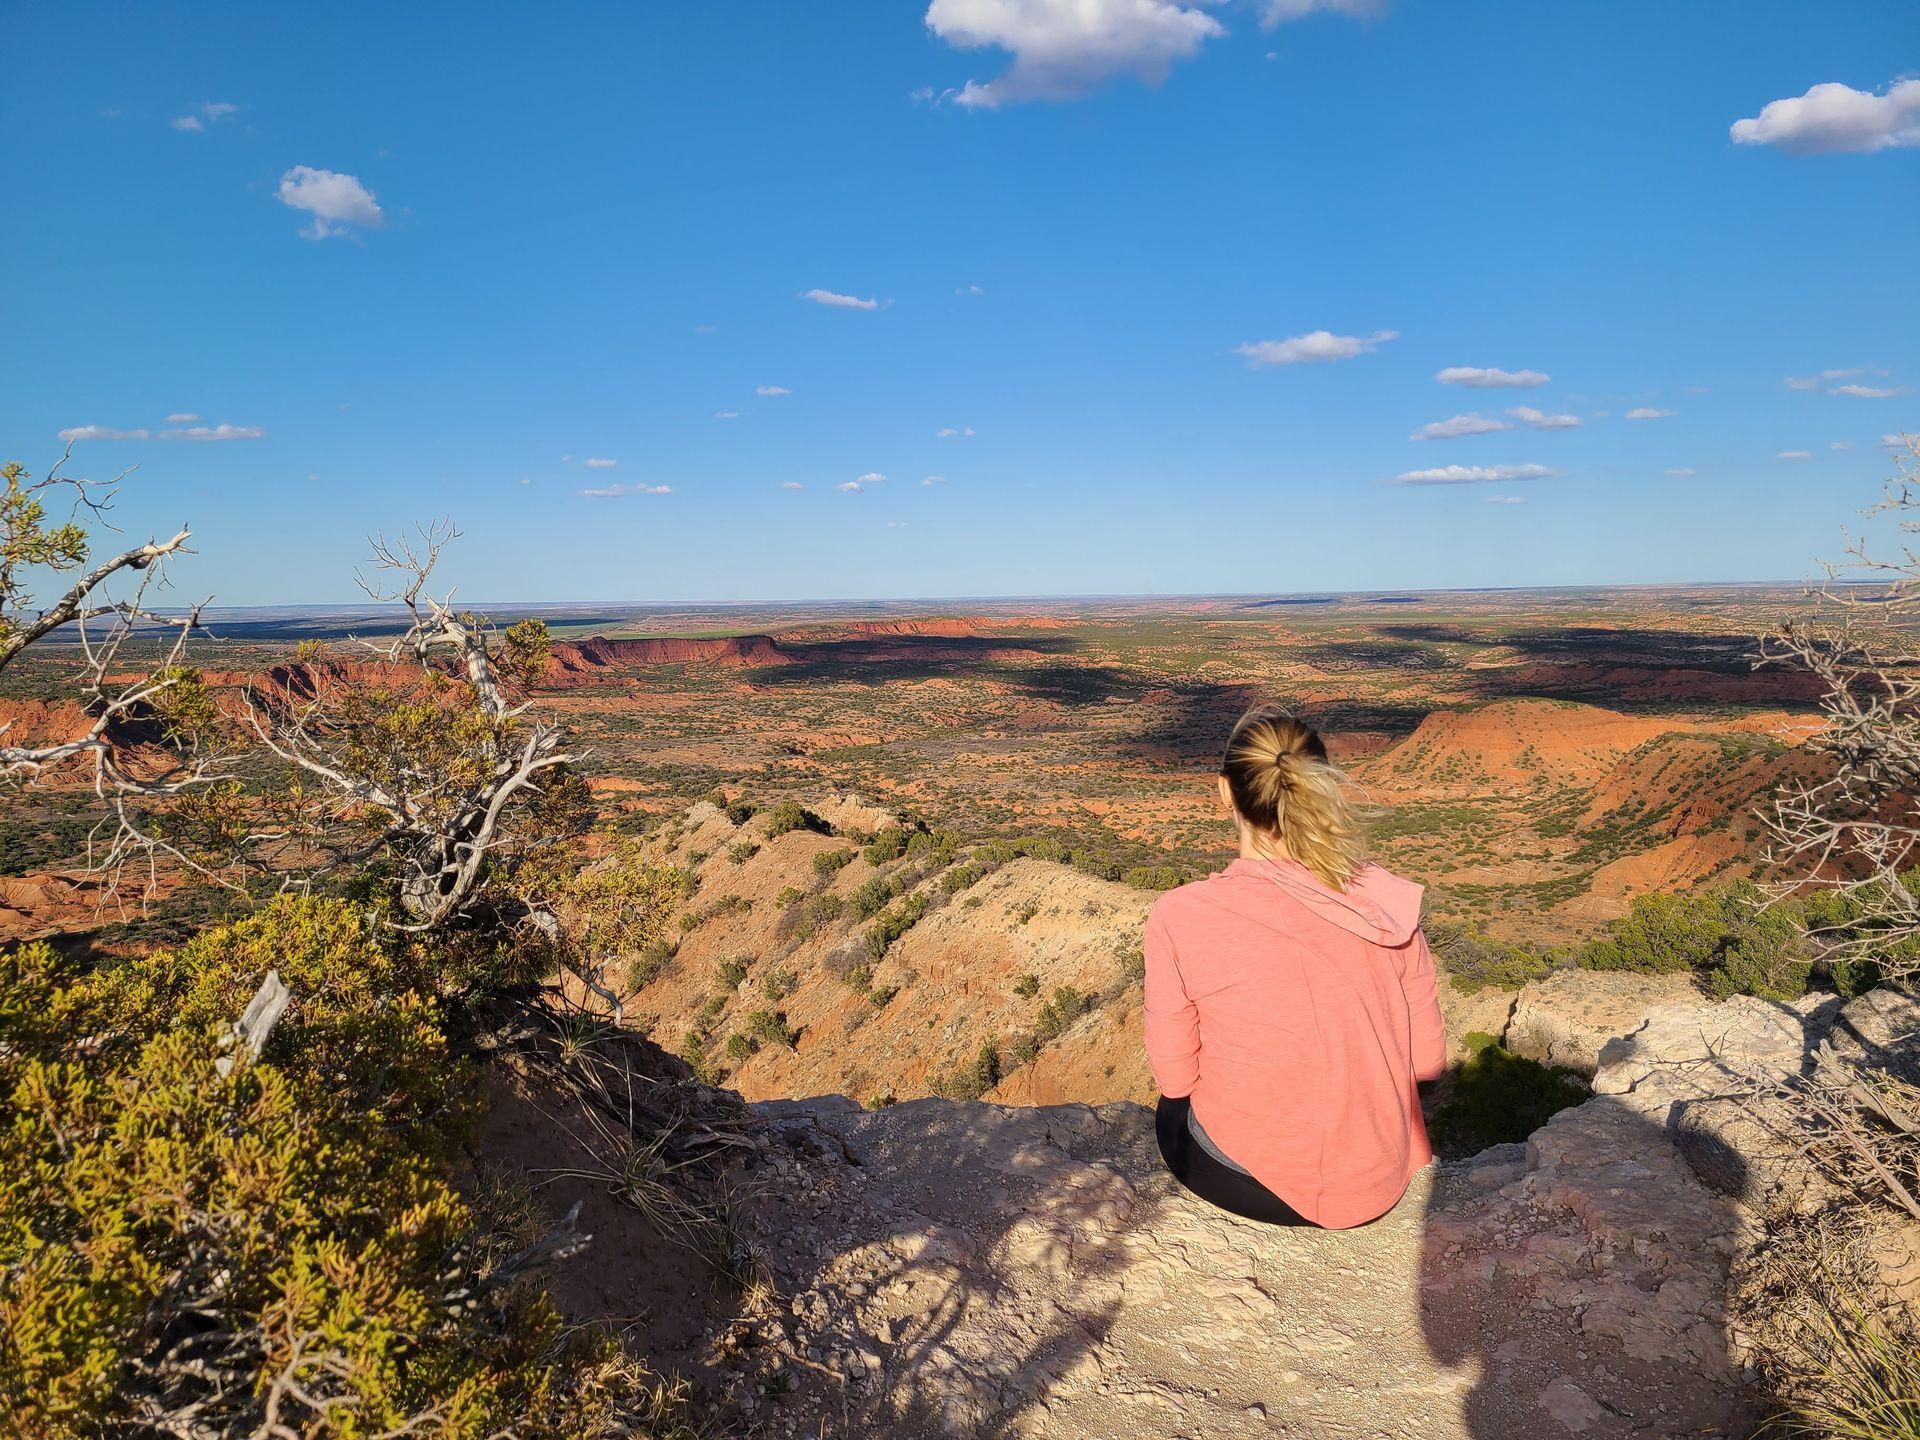 Lydia sitting on a ledge and looking out a canyon with orange rock views.